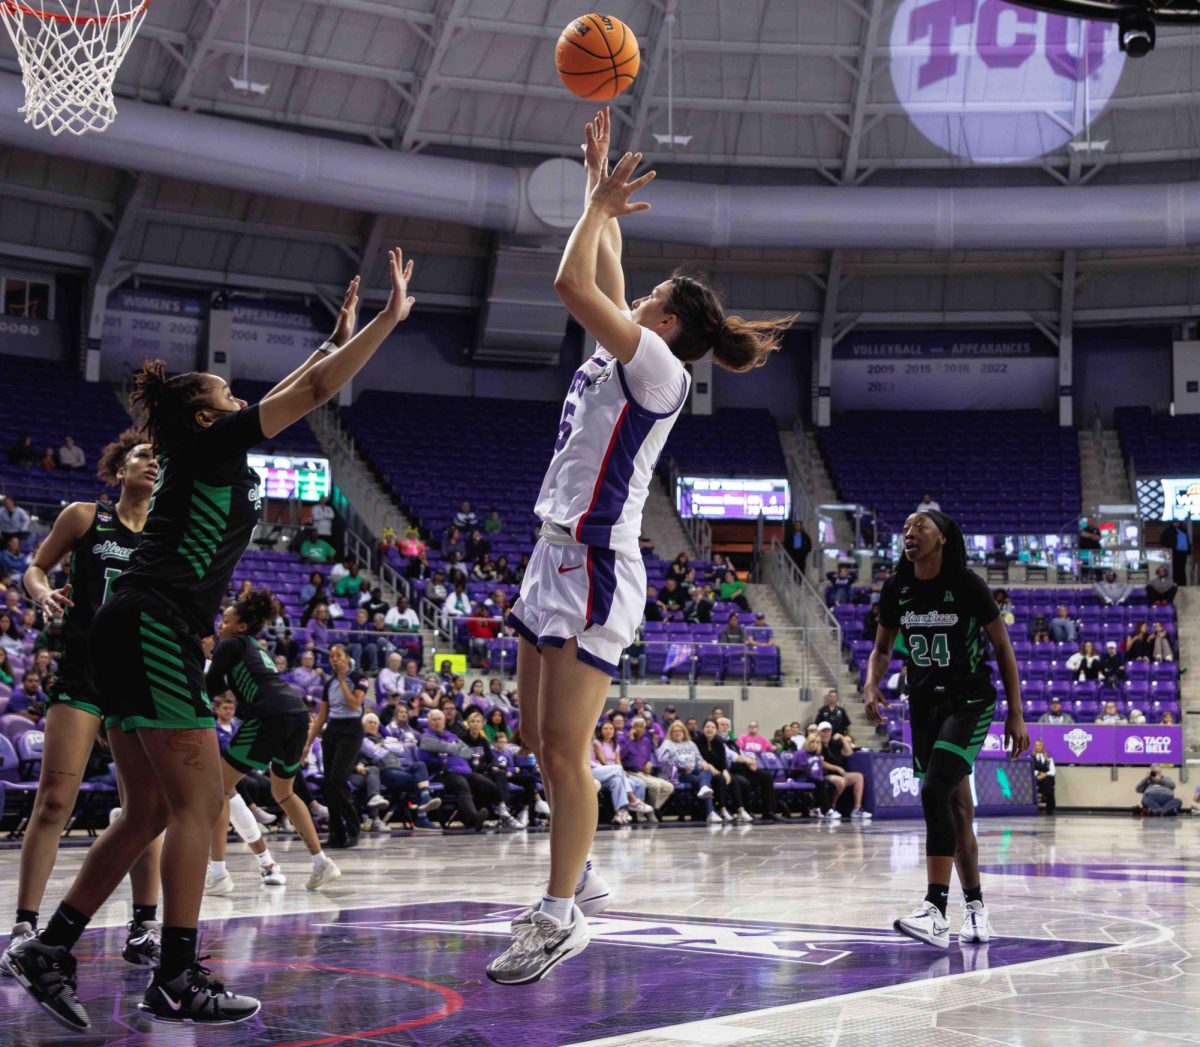 TCU guard Una Jovanovic shoots a shot at Ed and Rae Schollmaier Arena in Fort Worth, Texas on March 21st, 2024. The TCU Horned Frogs beat the North Texas Mean Green 67-58. (TCU360/ Tyler Chan)